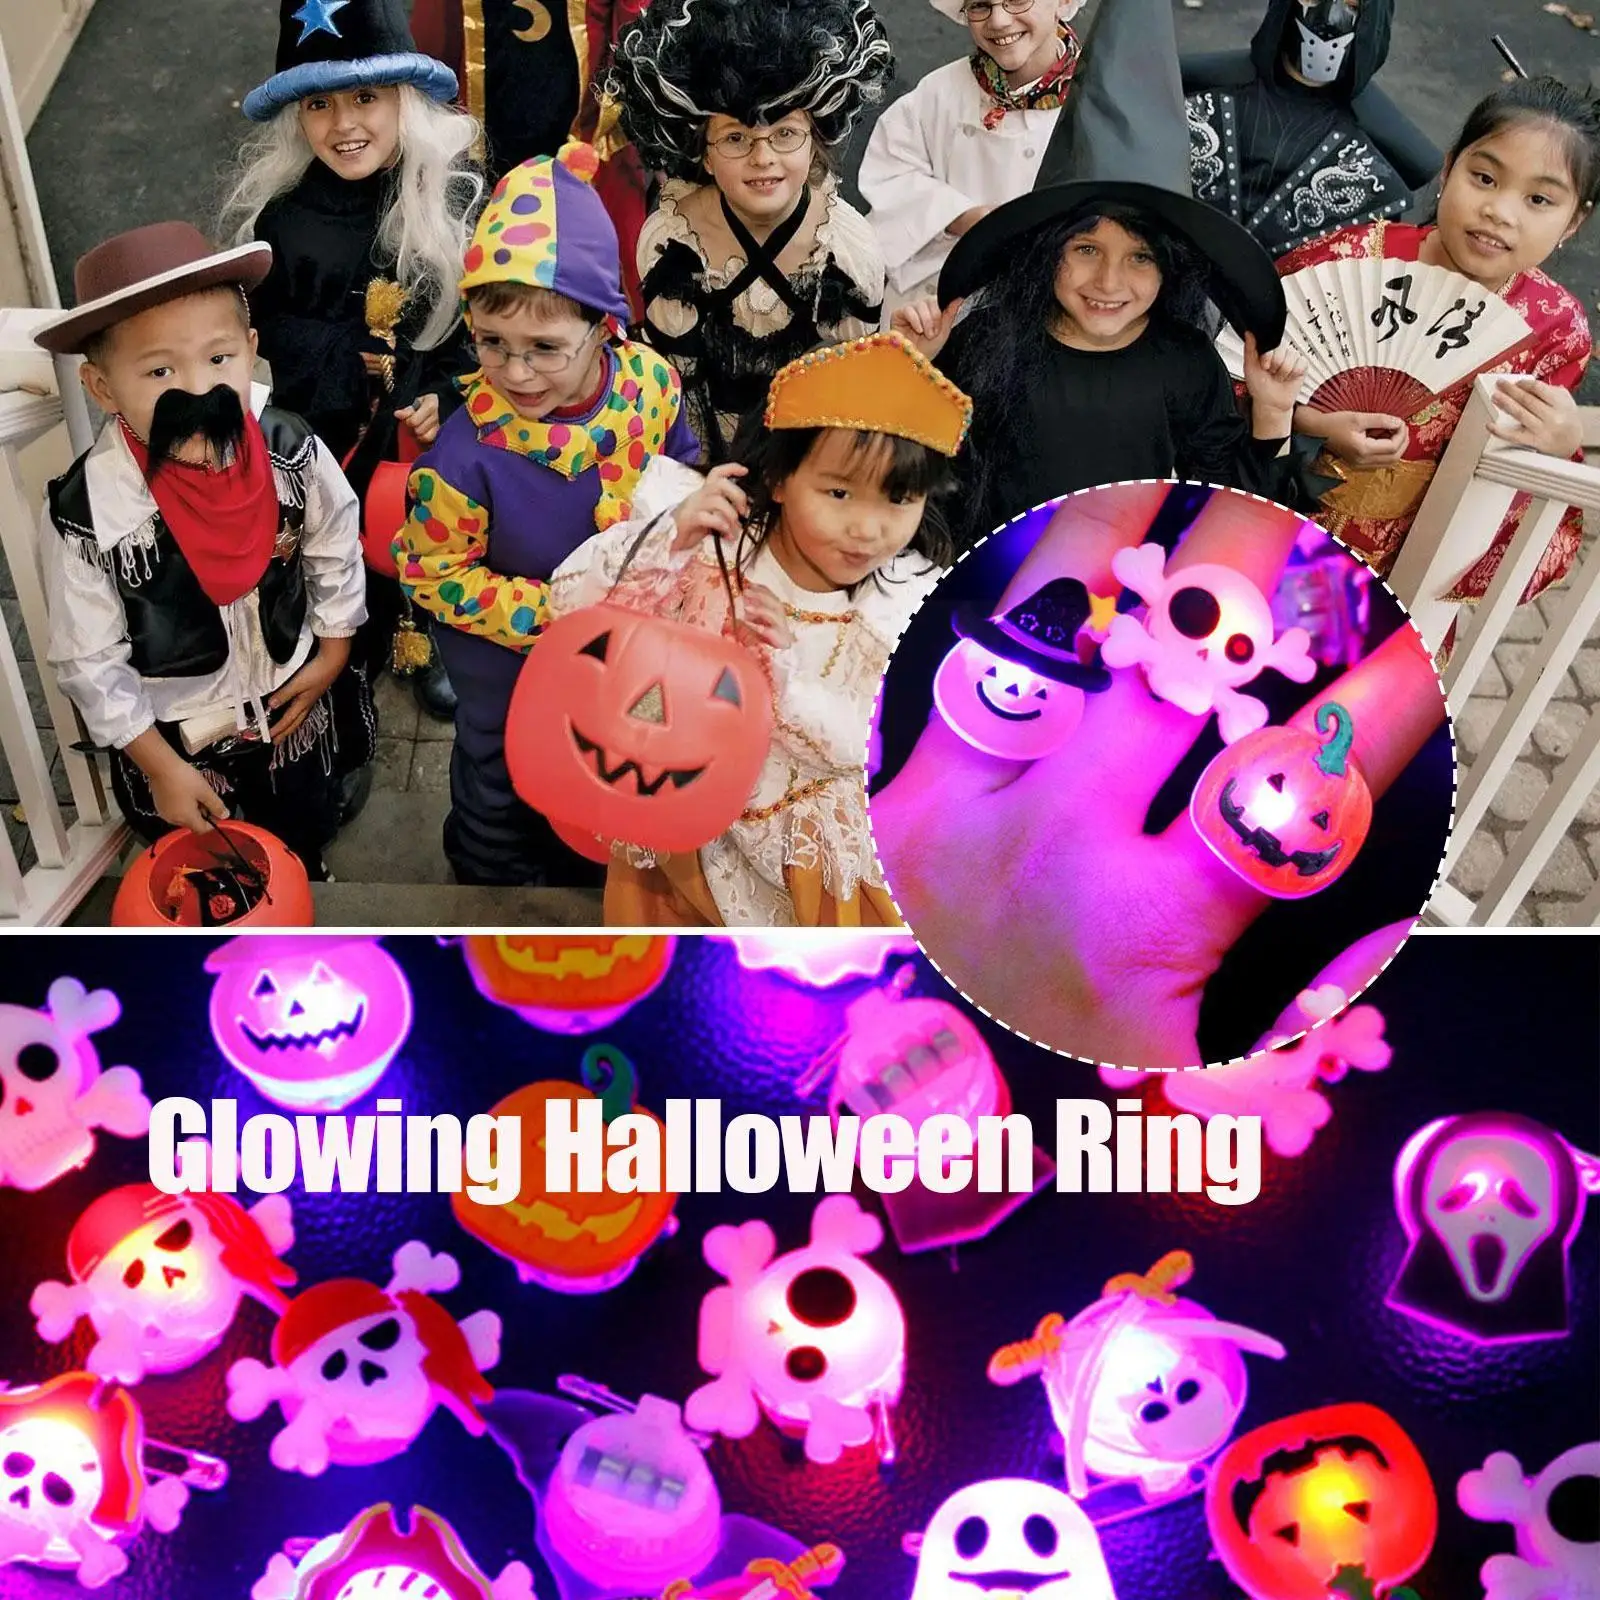 

1pc Halloween Glowing Ring Brooch Cute Led Flash Pumpkin Ghost Party Ring Bat Skull Kids Adult Gifts Brooch Funny Toys Hall Q9f3